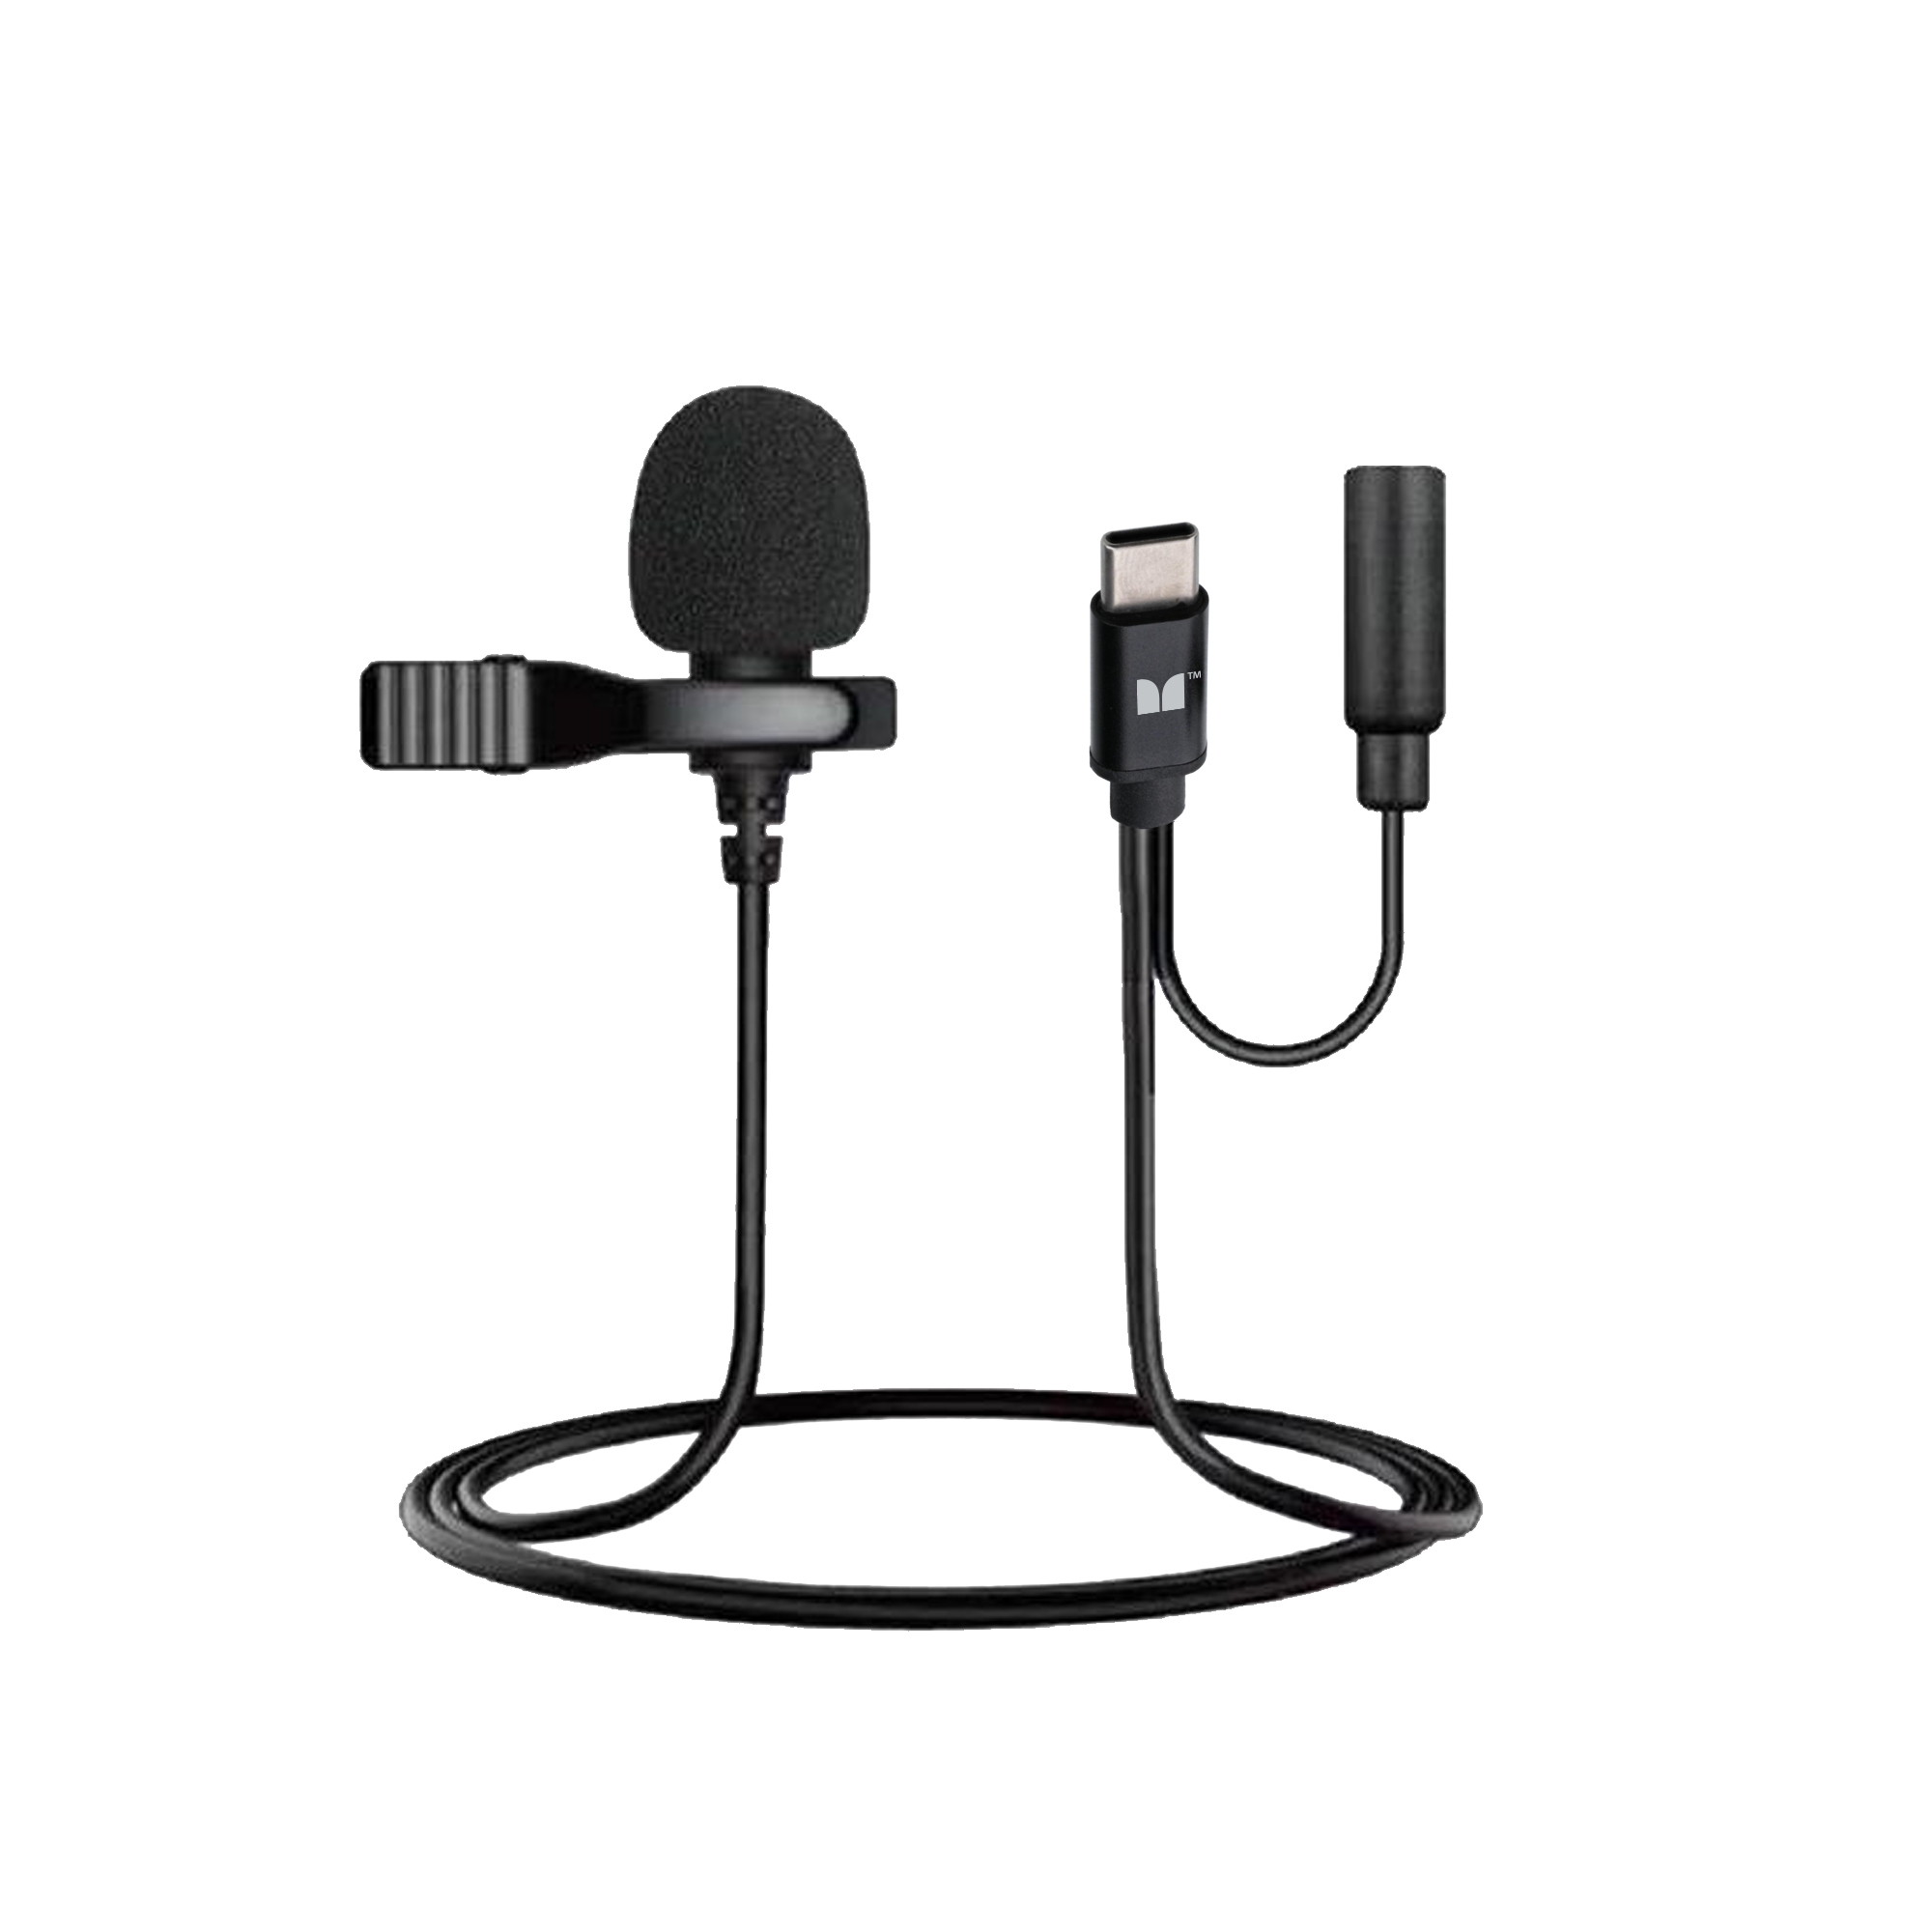 Monster Lavalier Clip-on Microphone, Mic For Type-C USB Ports, Universal Device Support - image 4 of 5